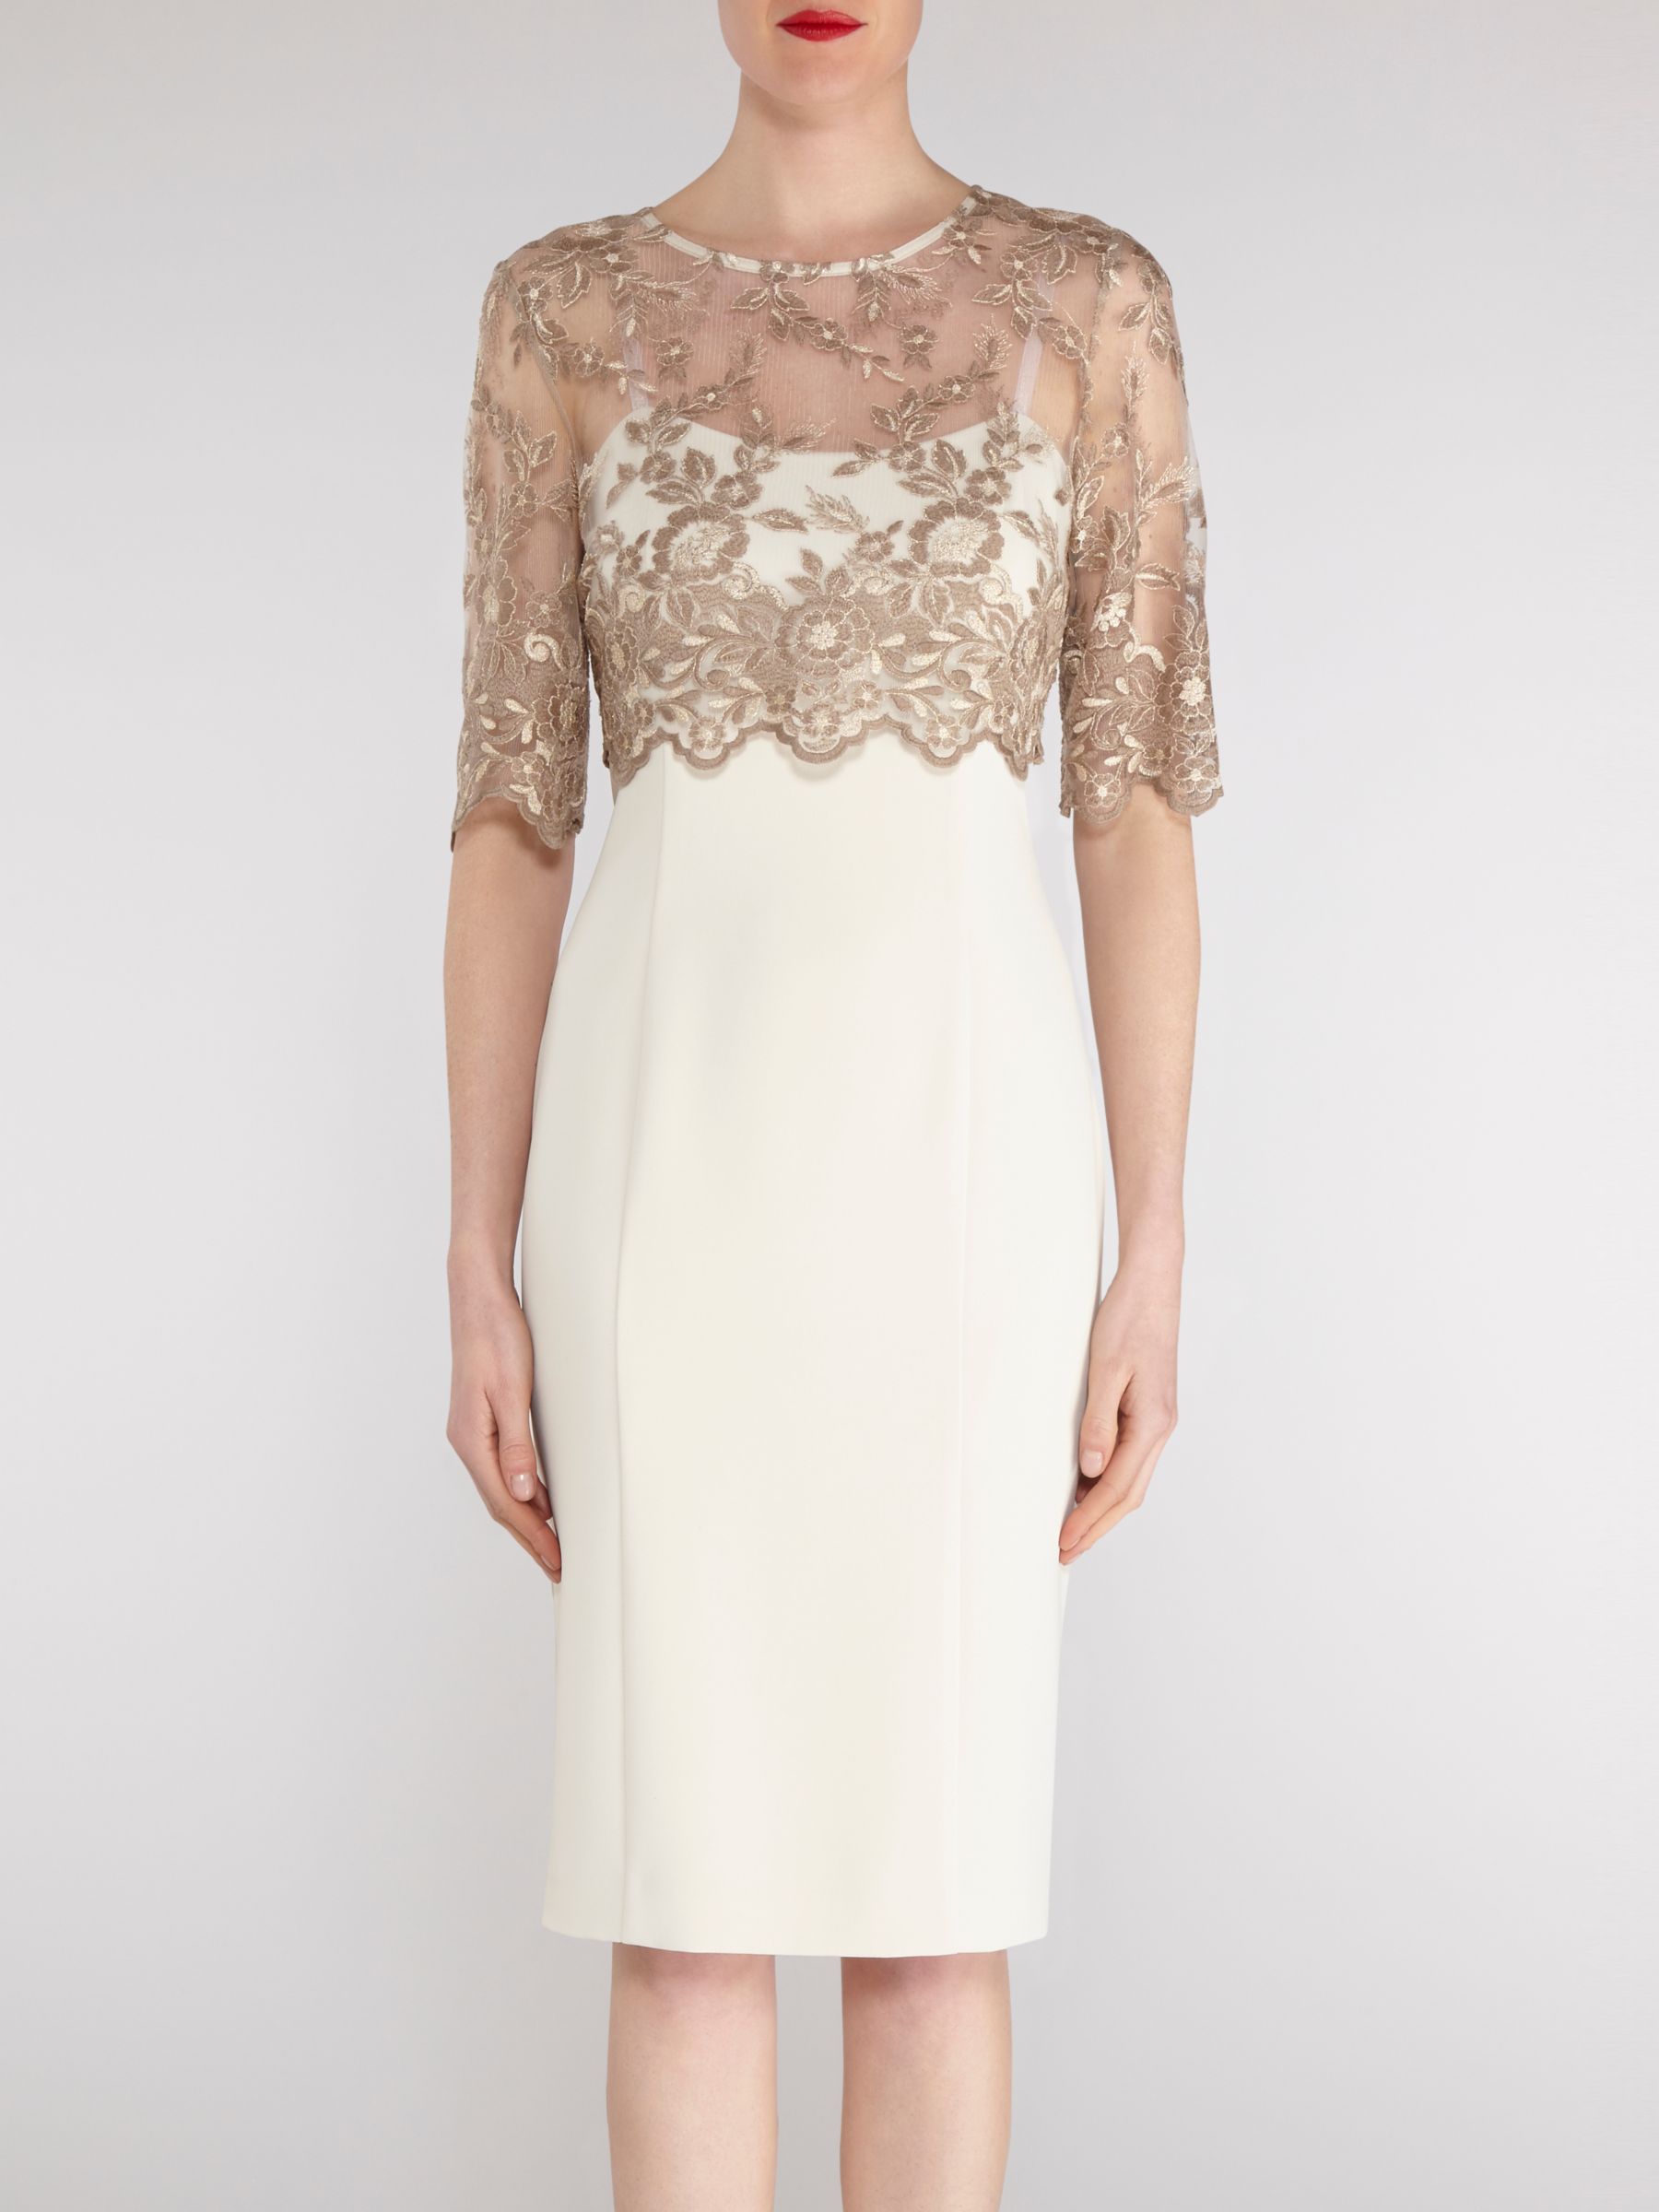 Gina Bacconi Antique Lace Top And Crepe Dress at John Lewis & Partners